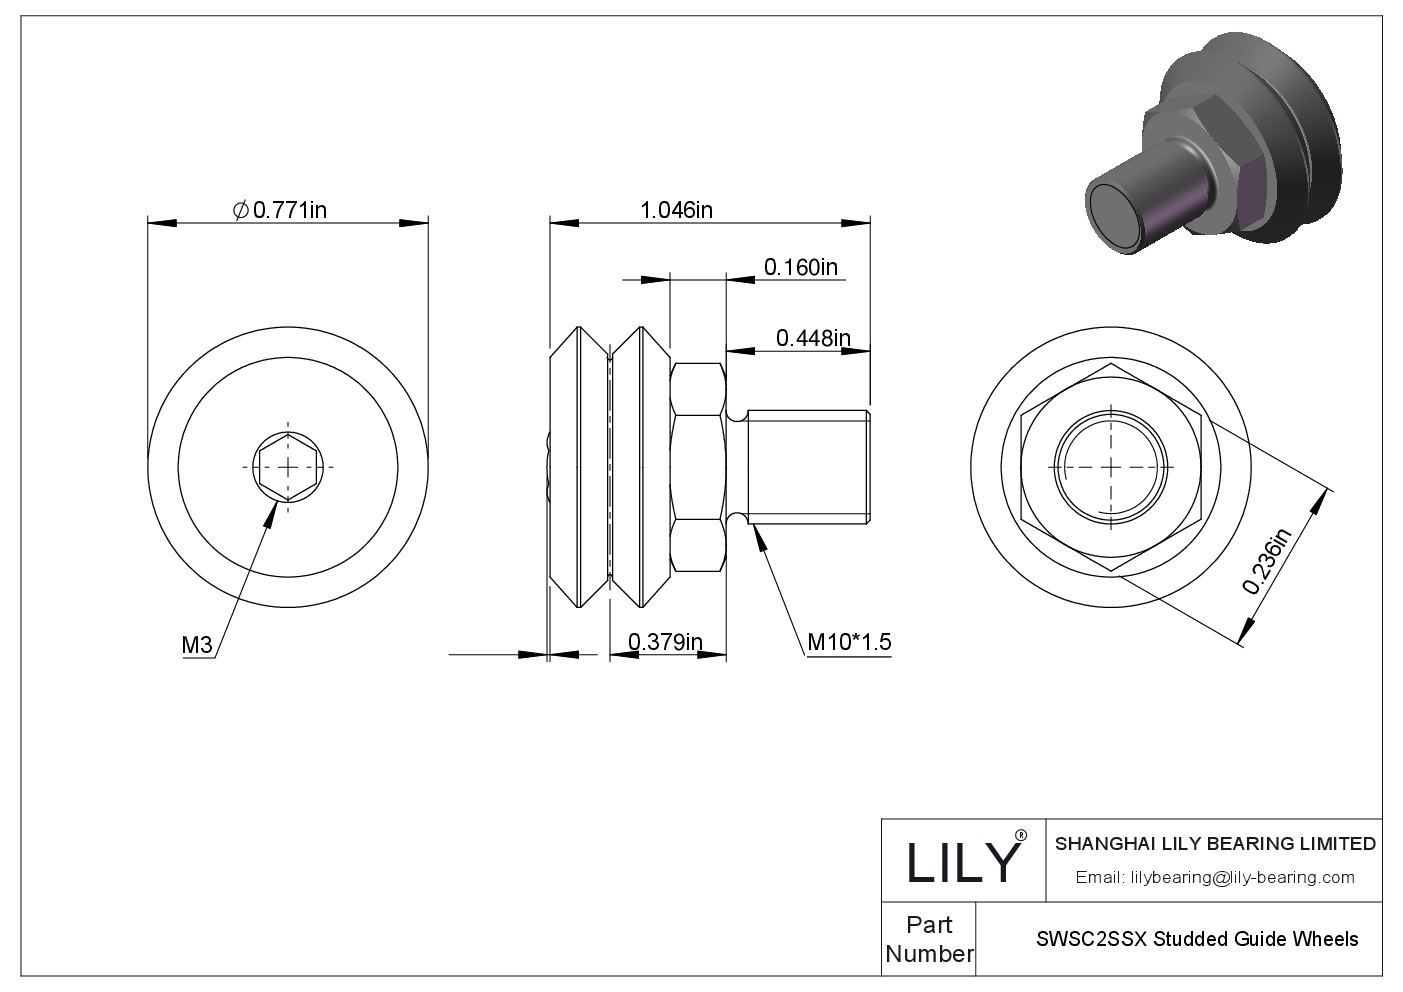 SWSC2SSX Studded Guide Wheels cad drawing